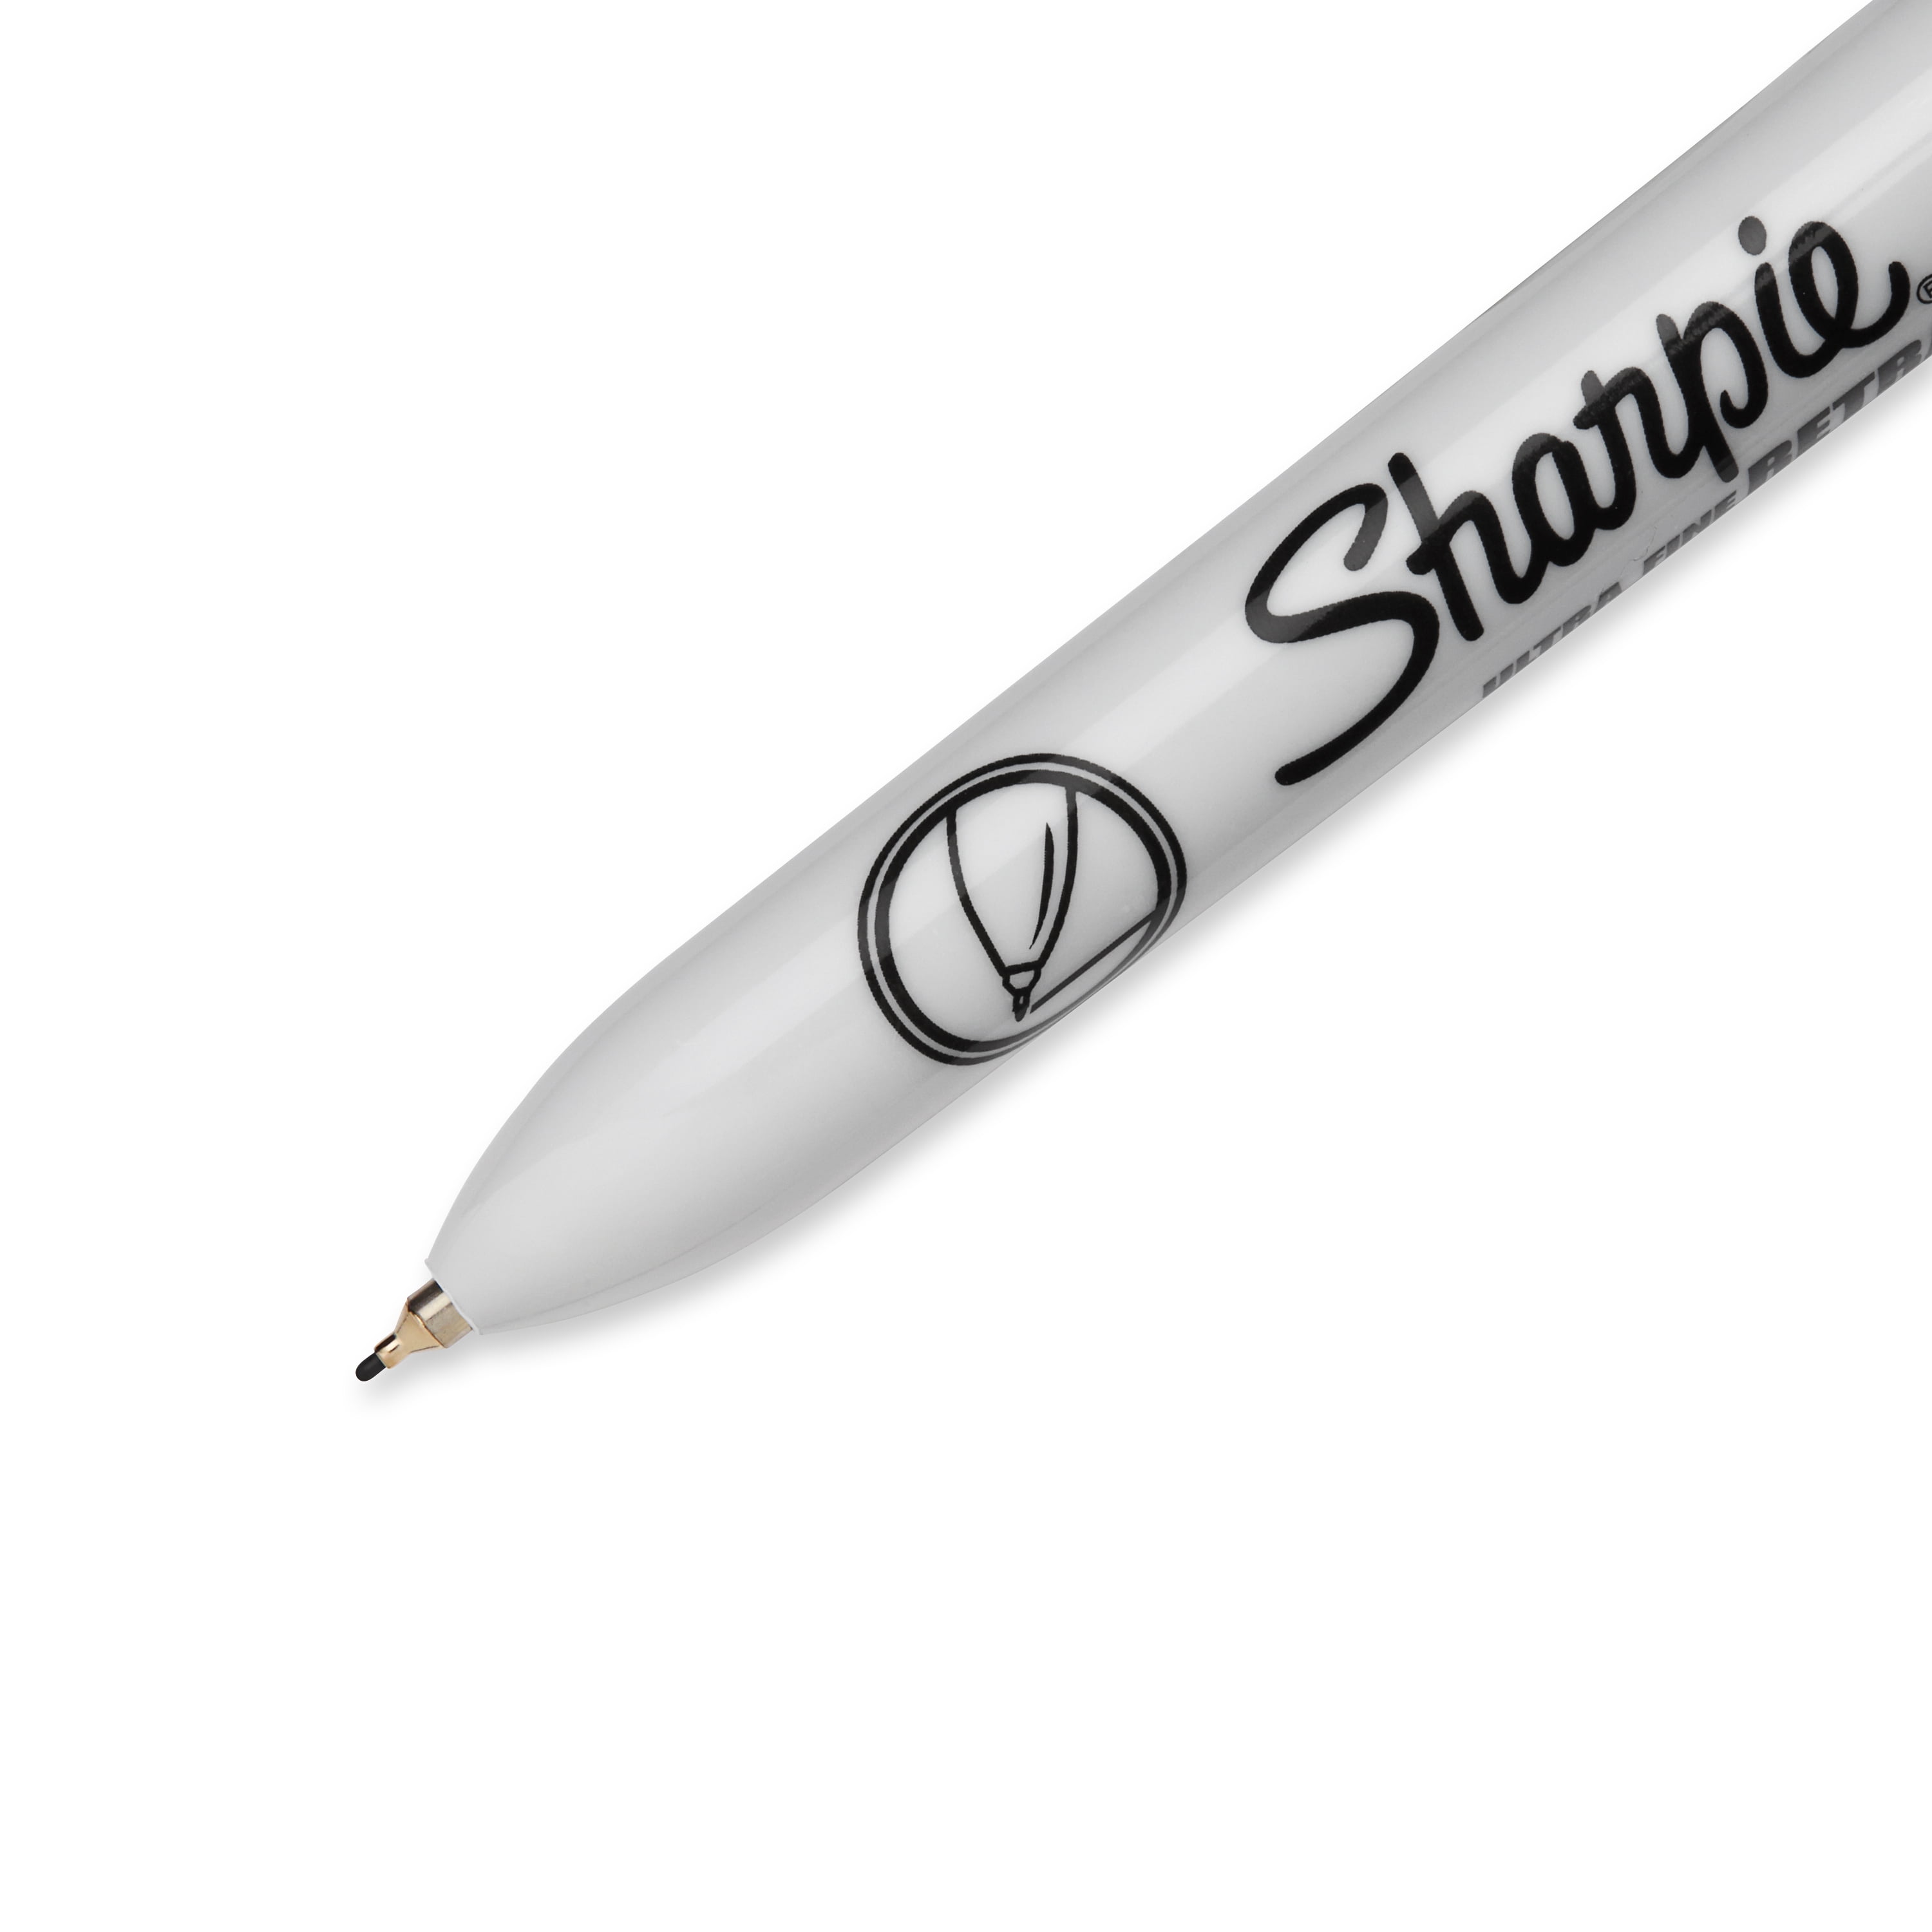 Sharpie Fine Point Black Permanent Marker (12 per Pack) 2005126 - The Home  Depot